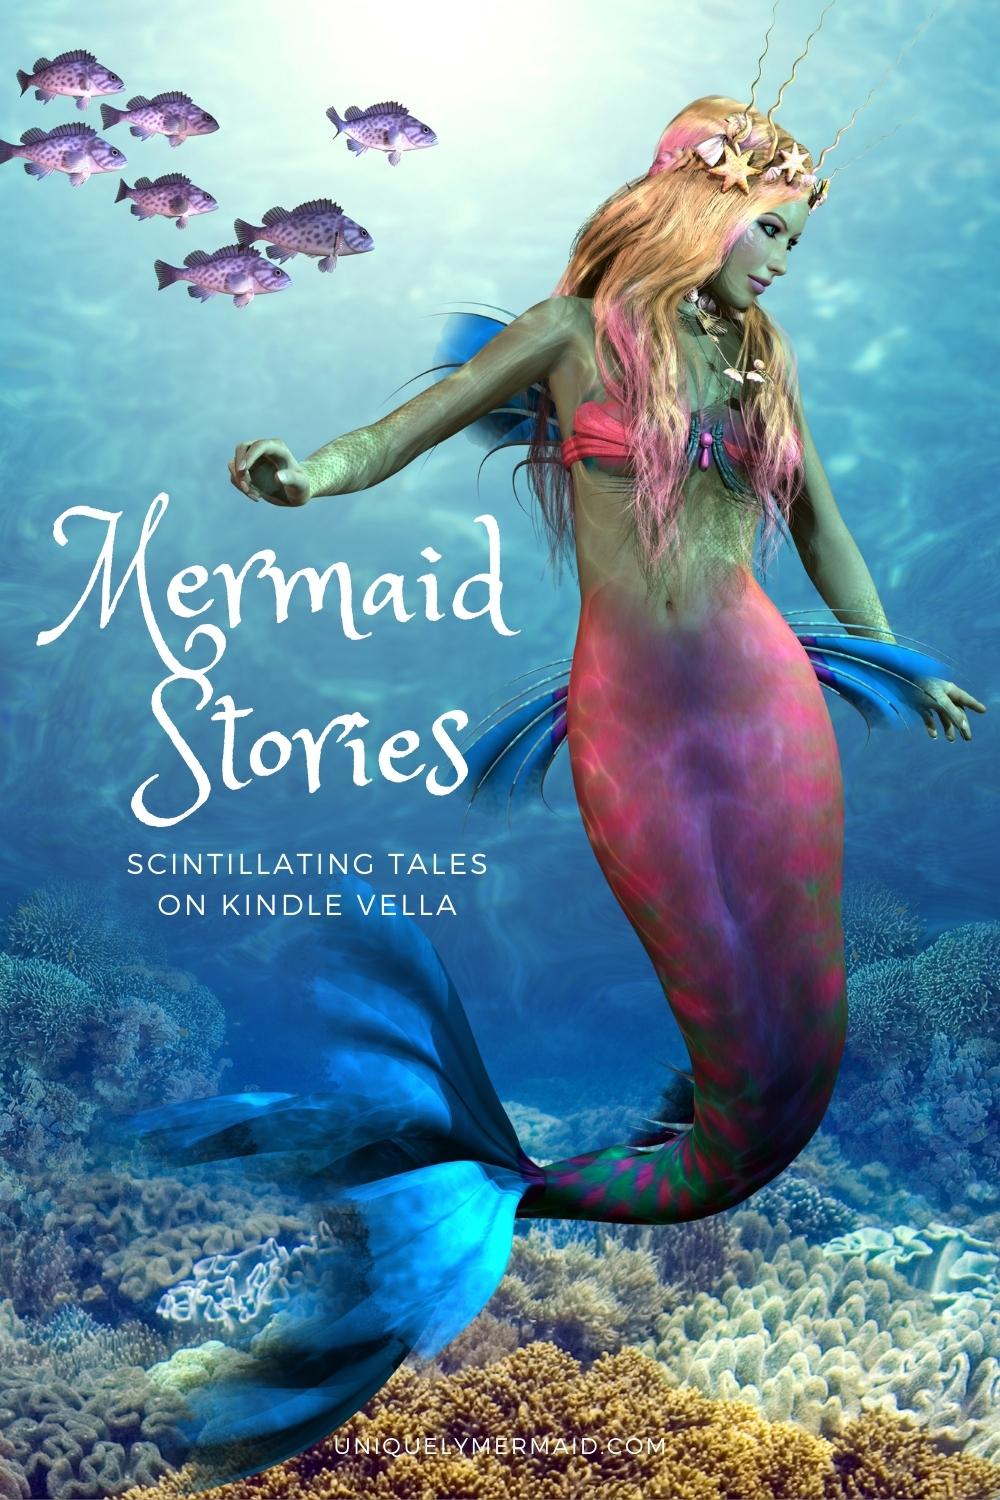 You'll love these intriguing stories about mermaids that I've written for Kindle Vella. New episodes added regularly!